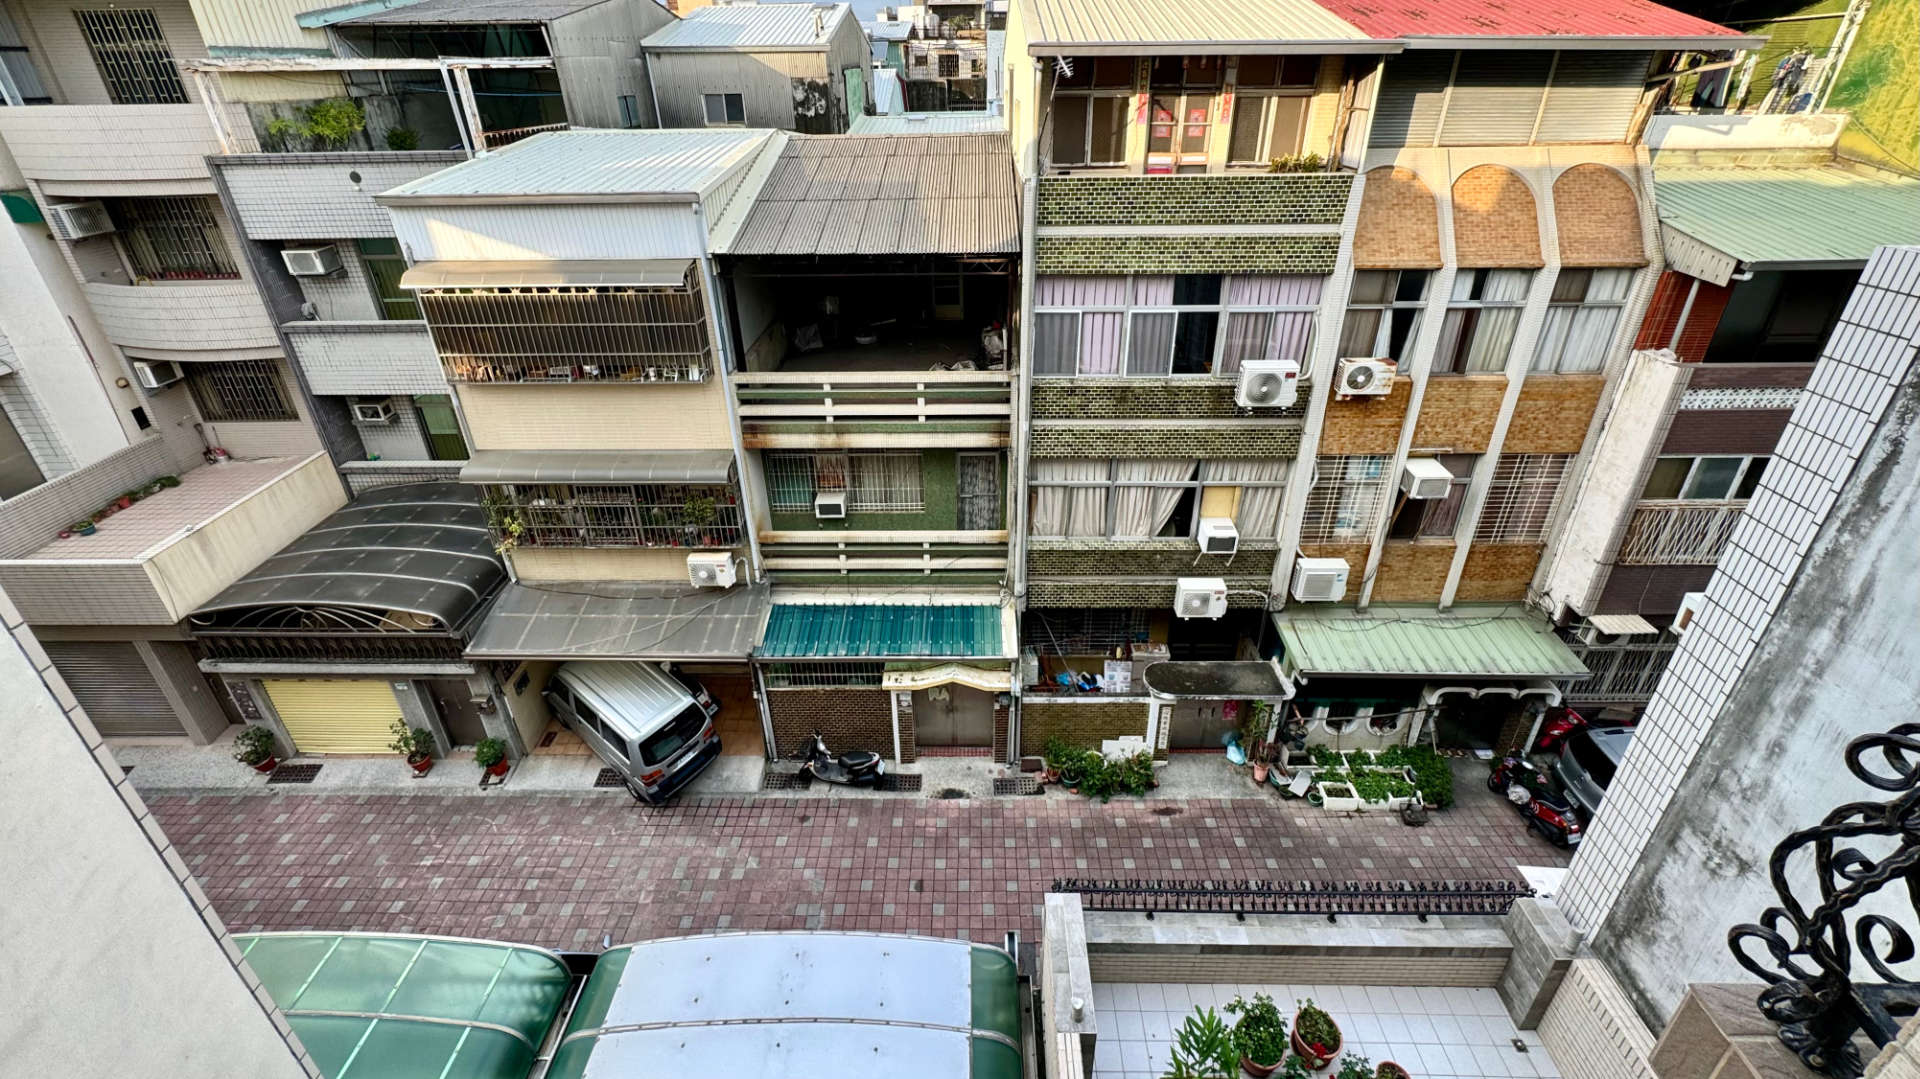 A view of townhouses along a narrow street in Tainan, taken from a fourth-floor balcony.